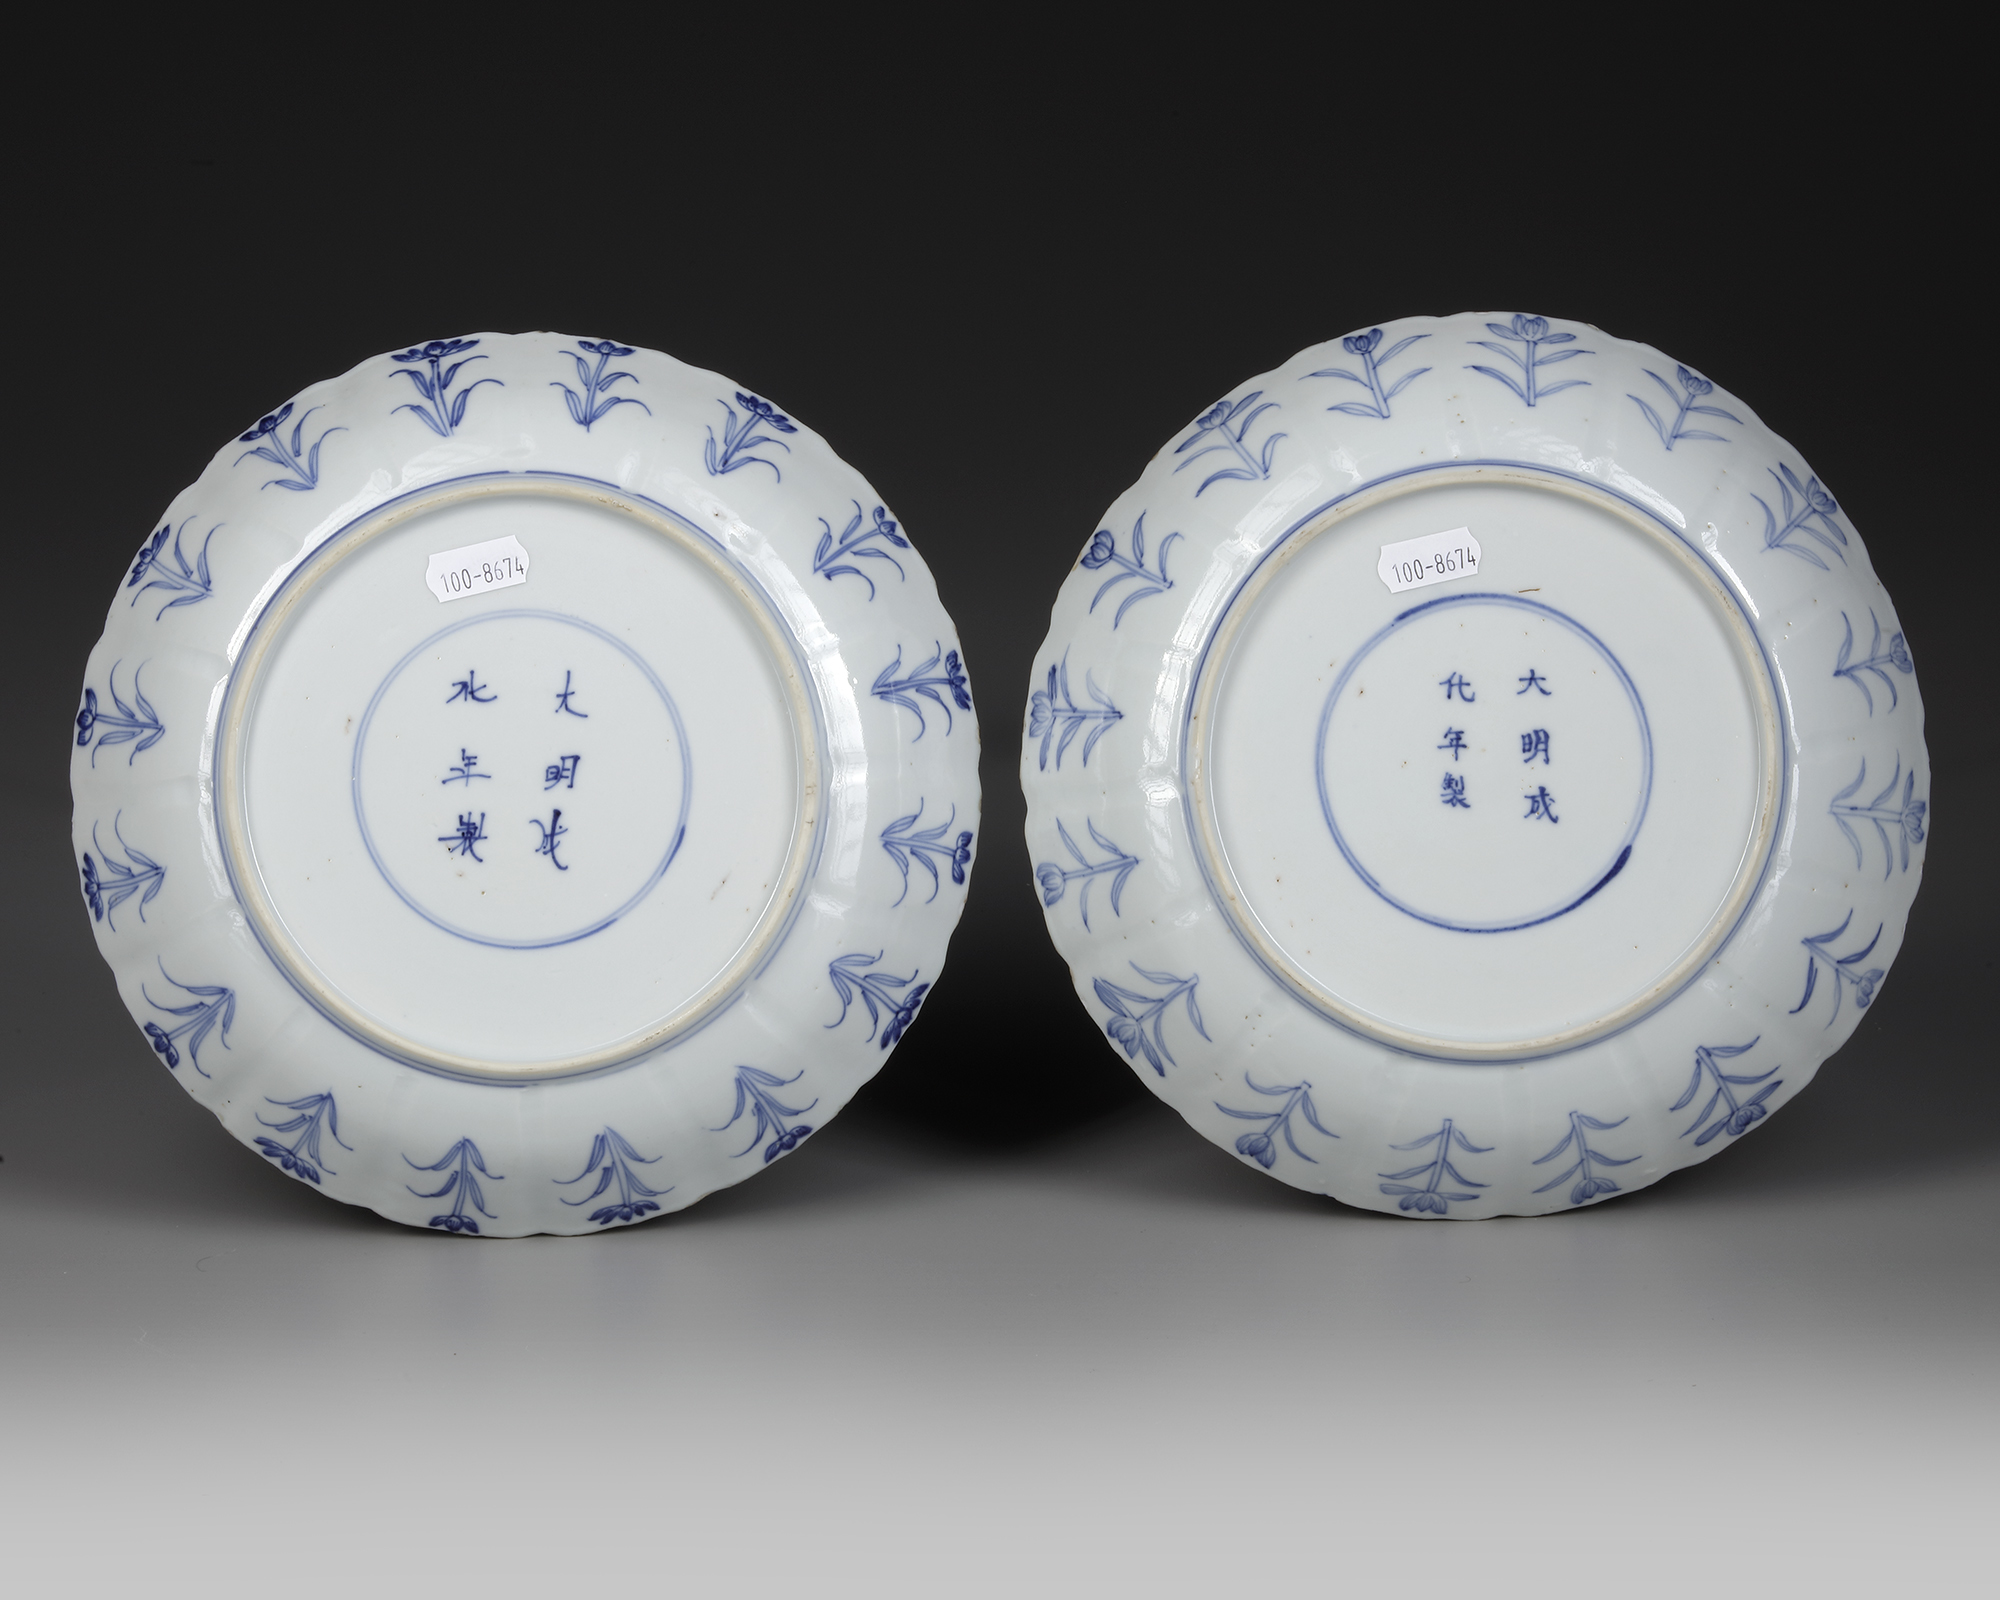 A PAIR OF CHINESE BLUE AND WHITE 'HUNTING' DISHES, KANGXI PERIOD (1662-1722) - Image 2 of 2